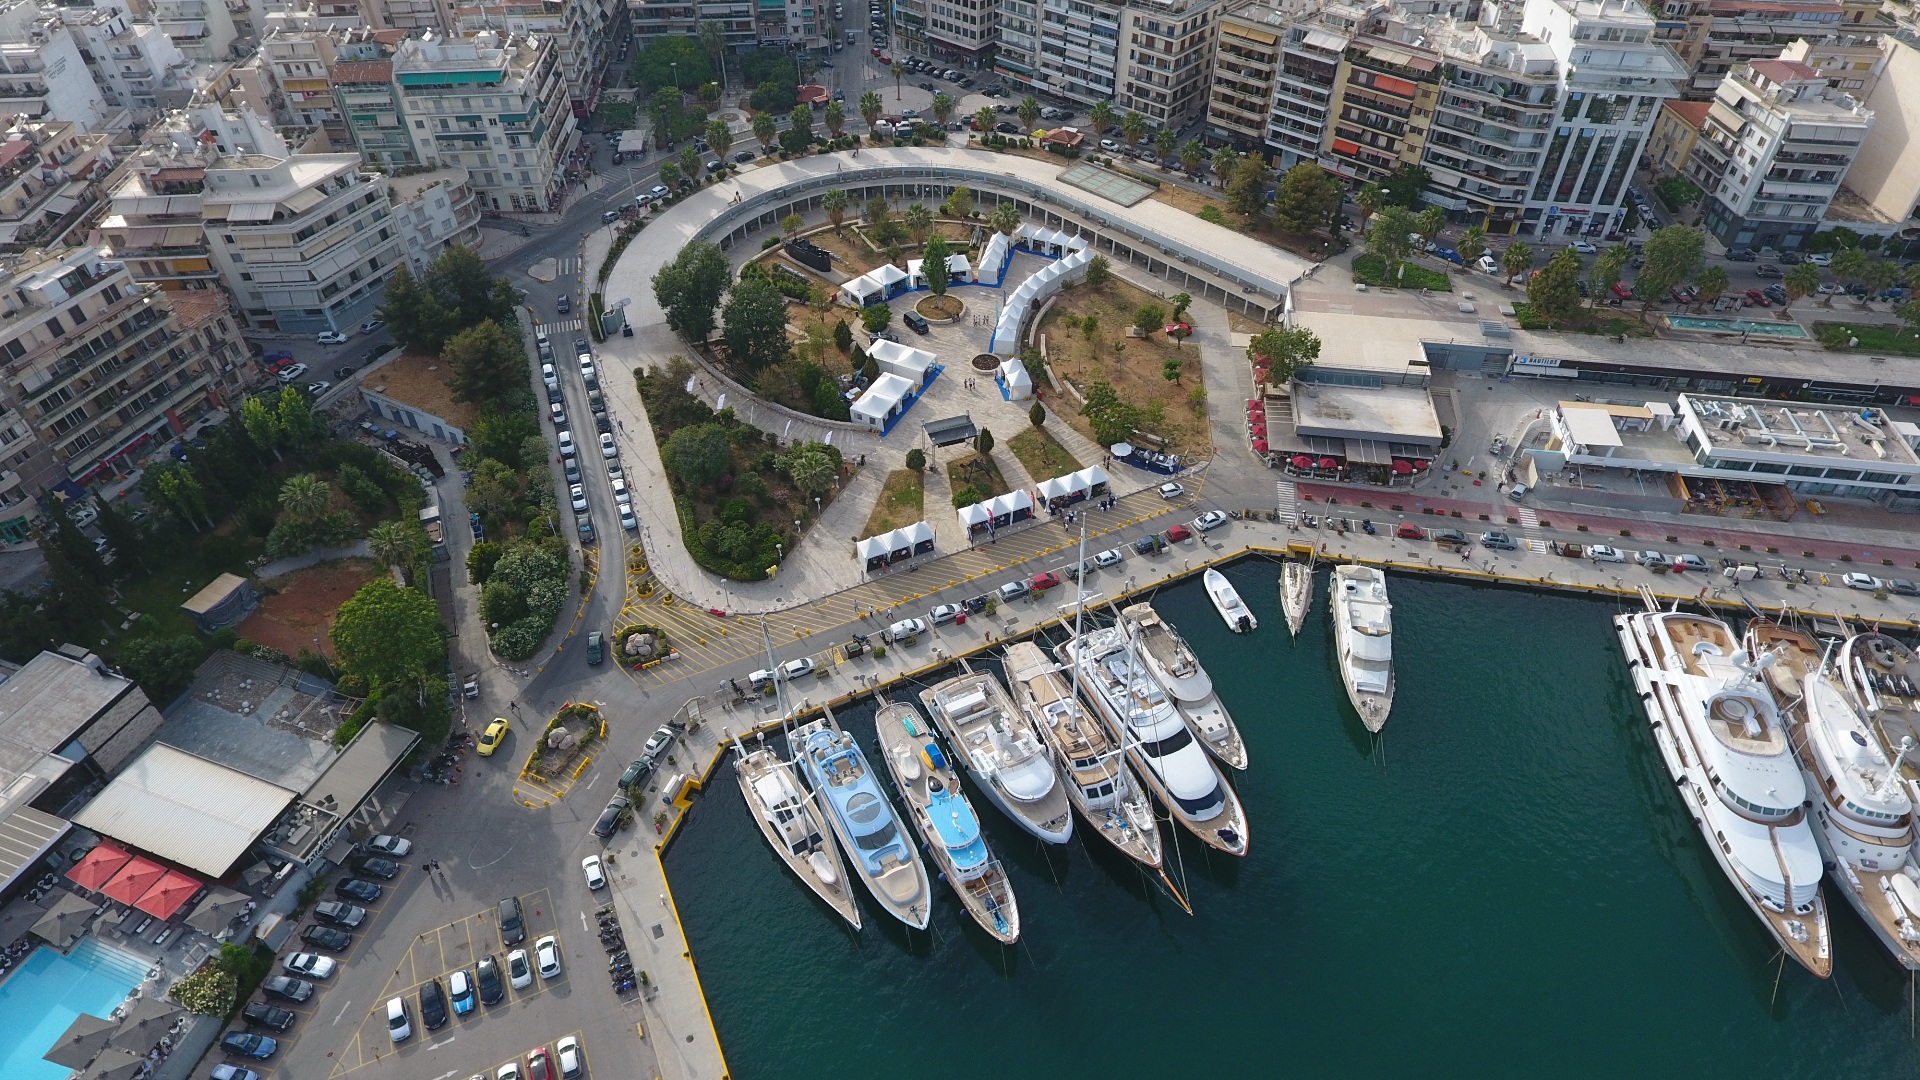 Hellenic Professional Yacht Owners Association